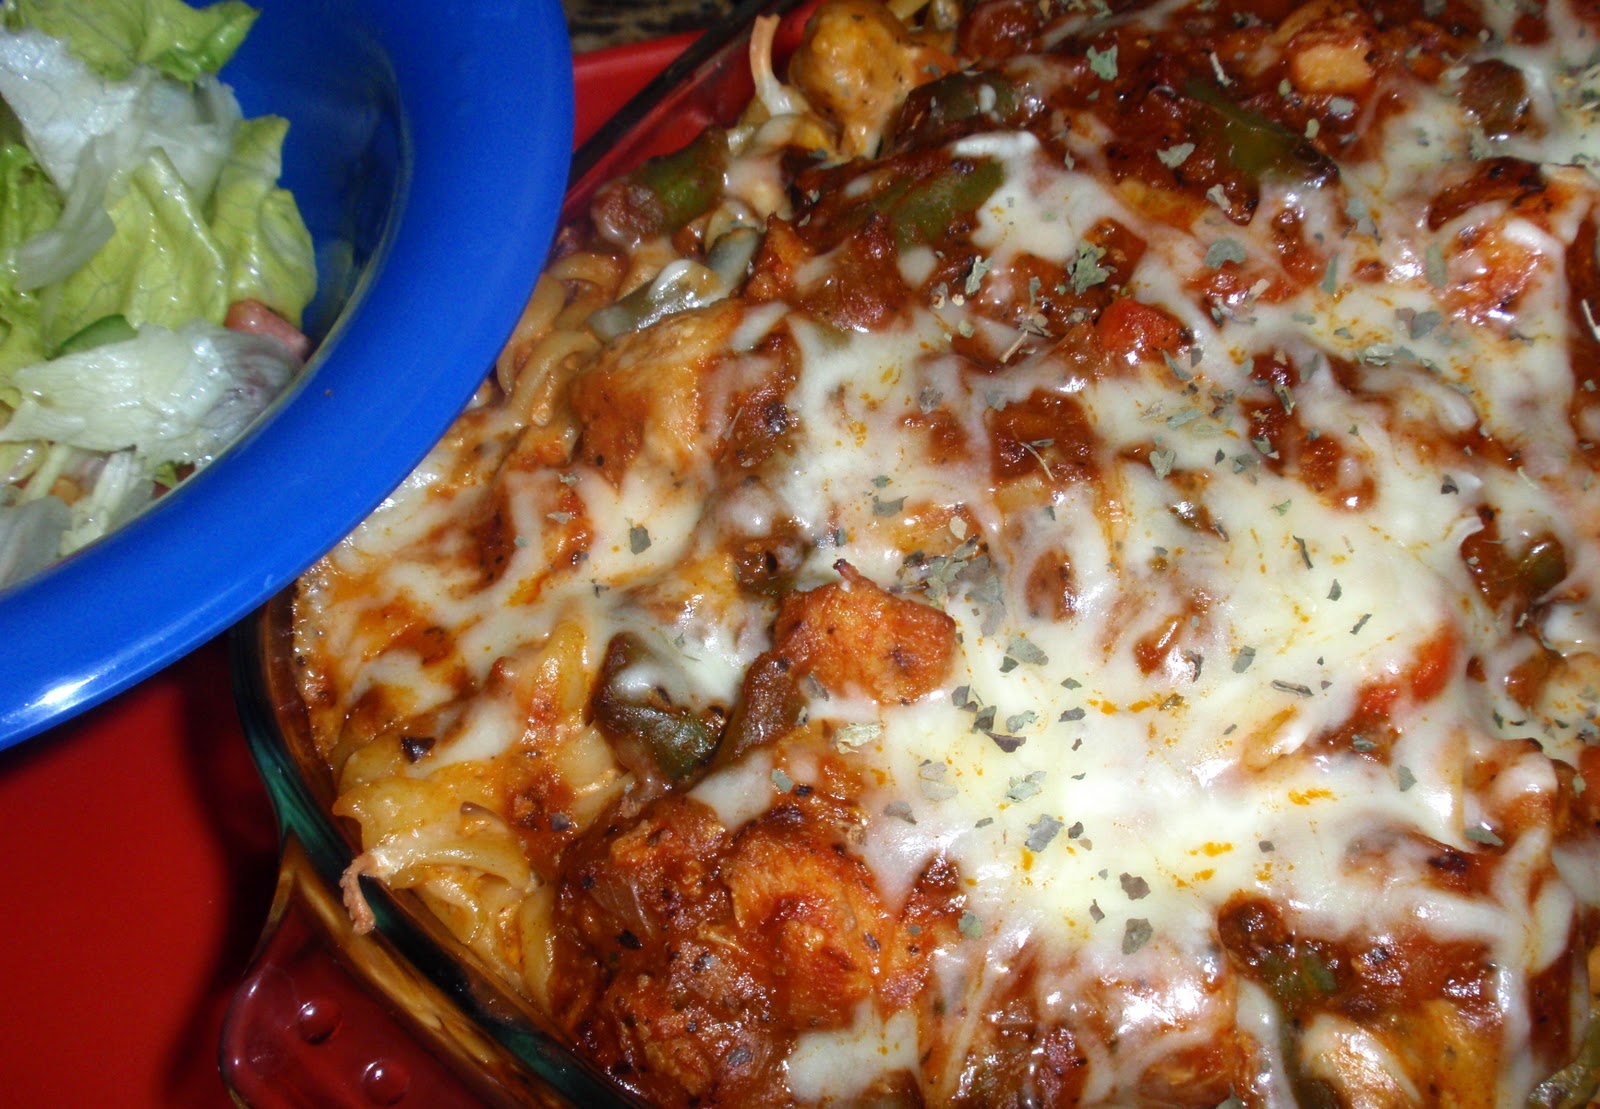 Everybunny Loves Food: Baked Chicken Pasta in Tomato Sauce